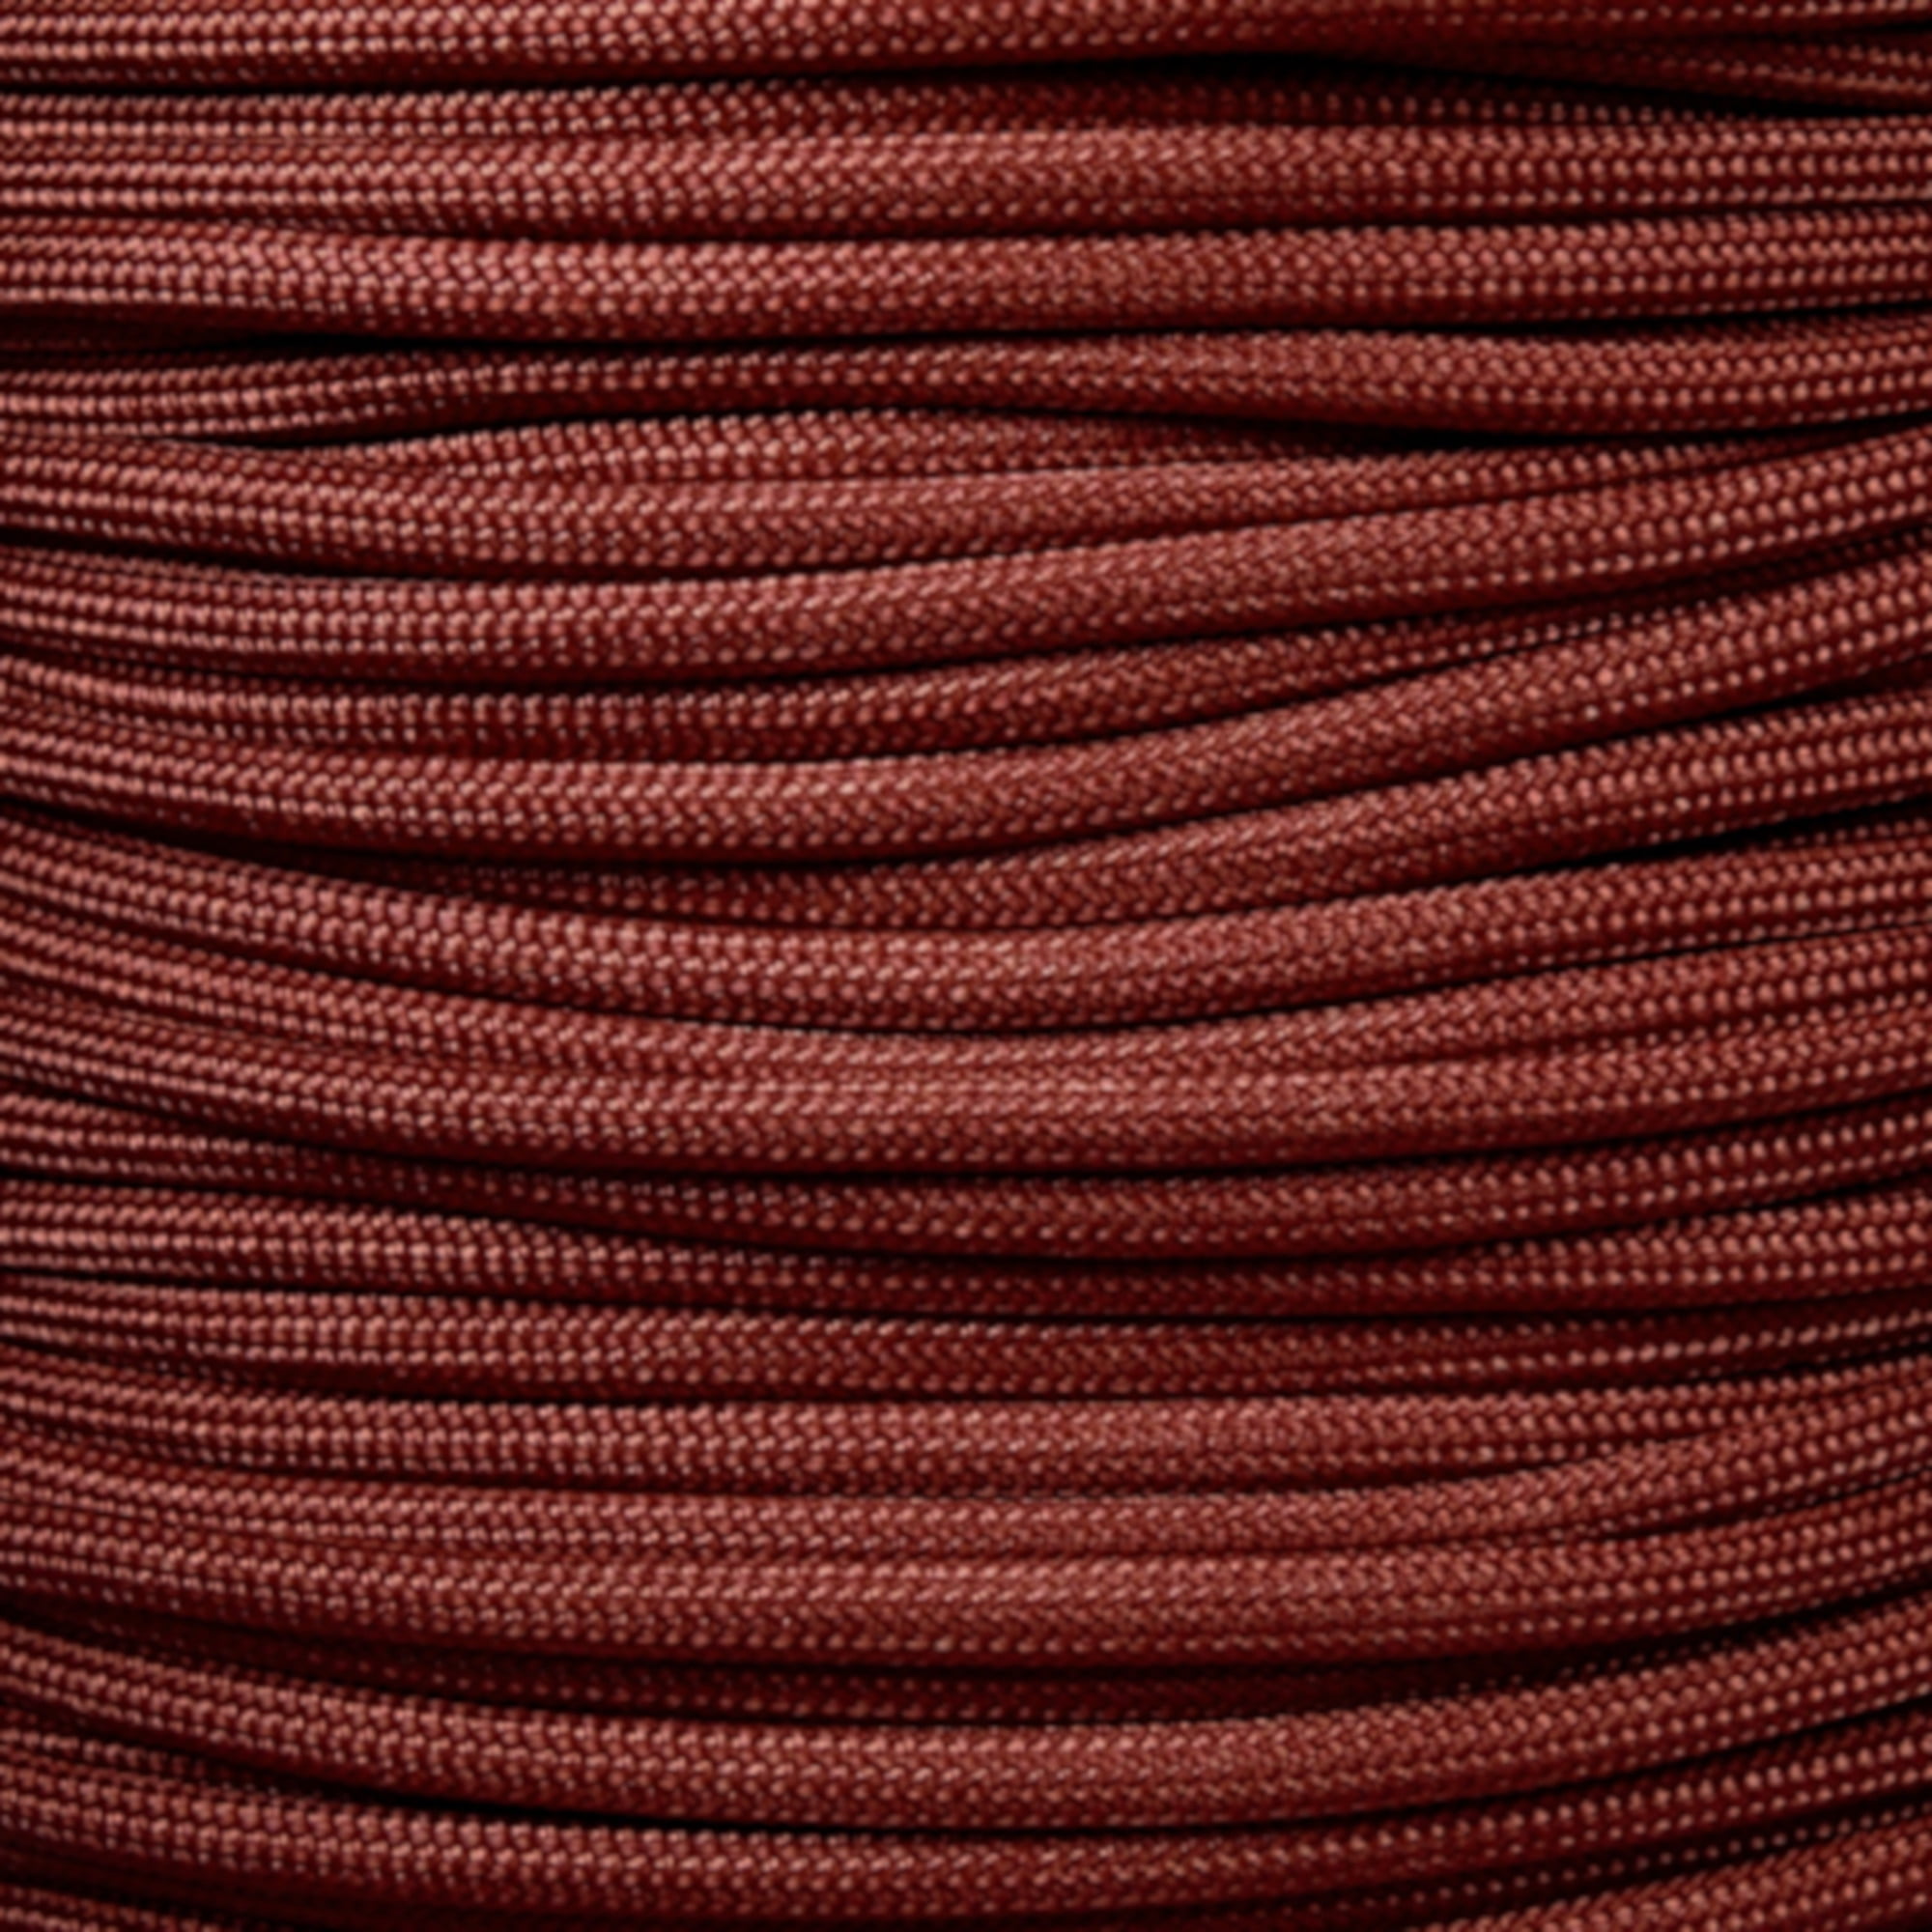 Mil Spec Paracord MIL-C-5040H Type III Built for Survival Titanium Series  made with Genuine Authentic 7 Strand 550 LB True 550 Military Specification  Strength Nylon Kernmantle Tactical Parachute Cord 